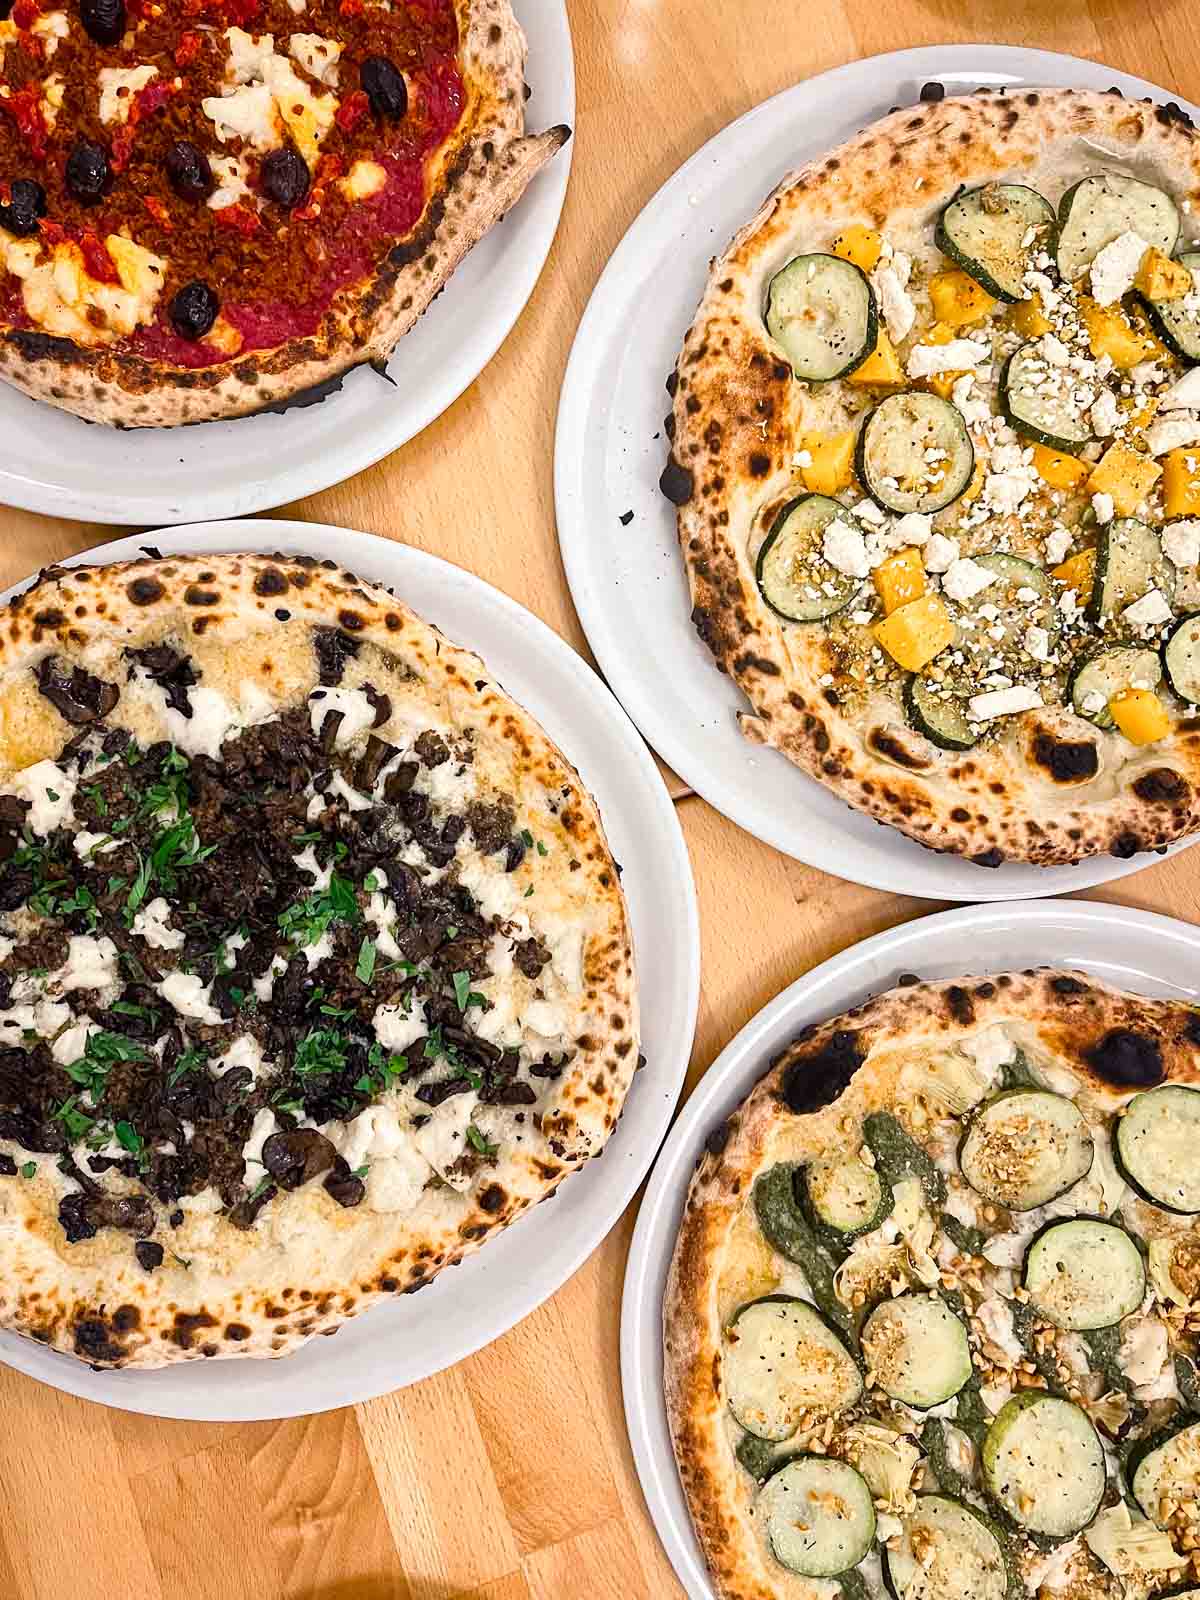 25 Best Vegan Restaurants in Vancouver BC for 2023 - image of four pizzas from Grano Pizzeria